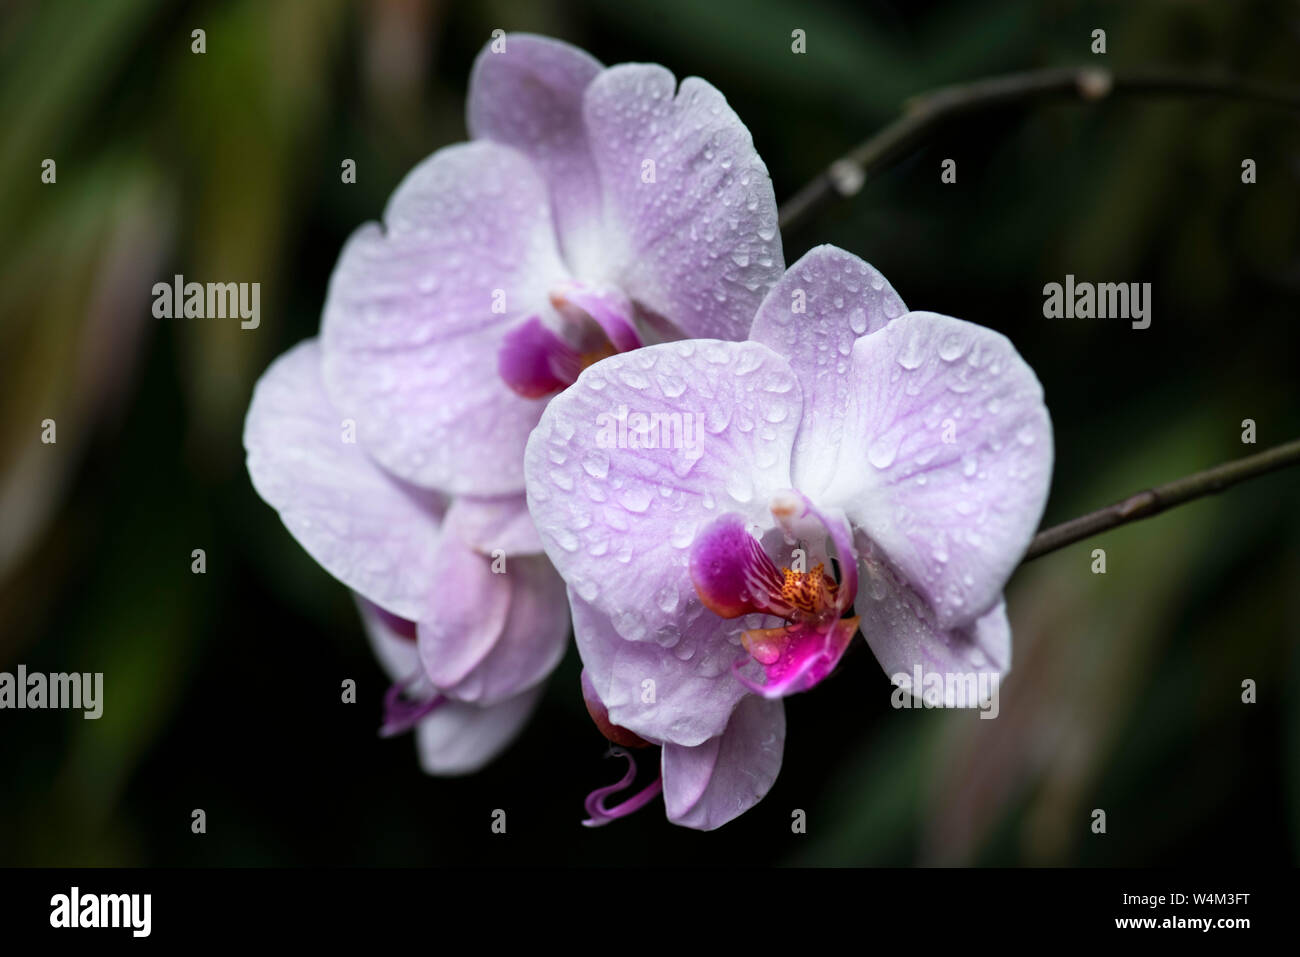 Phalaenopsis Orchid, Moth Orchid, with water droplets on petals Stock Photo